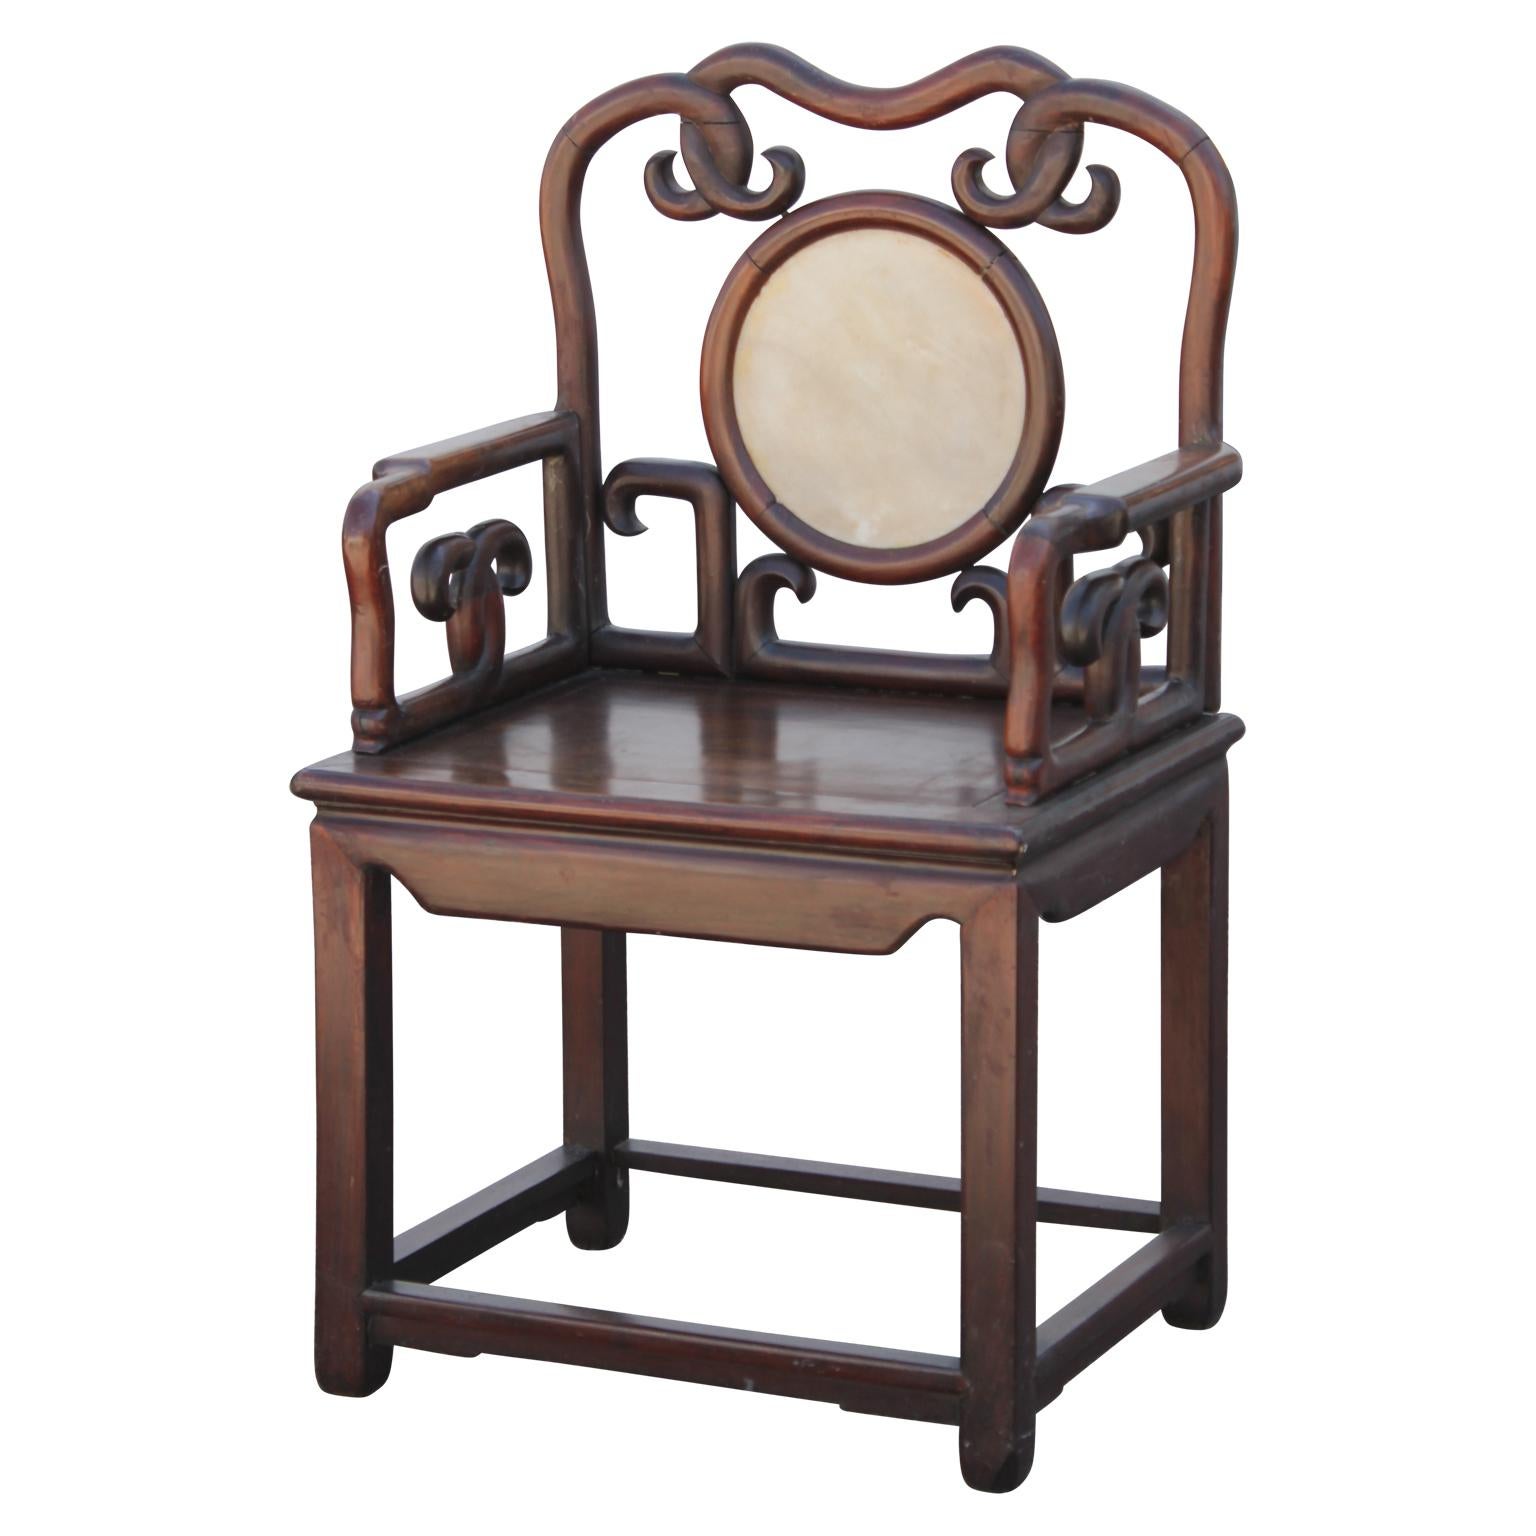 Stunning antique pair of Qing dynasty hongmu armchairs from the 1800s. These Chinese chairs are in the style of baker furniture and have carved rosewood details and a large marble plate on the back.
 